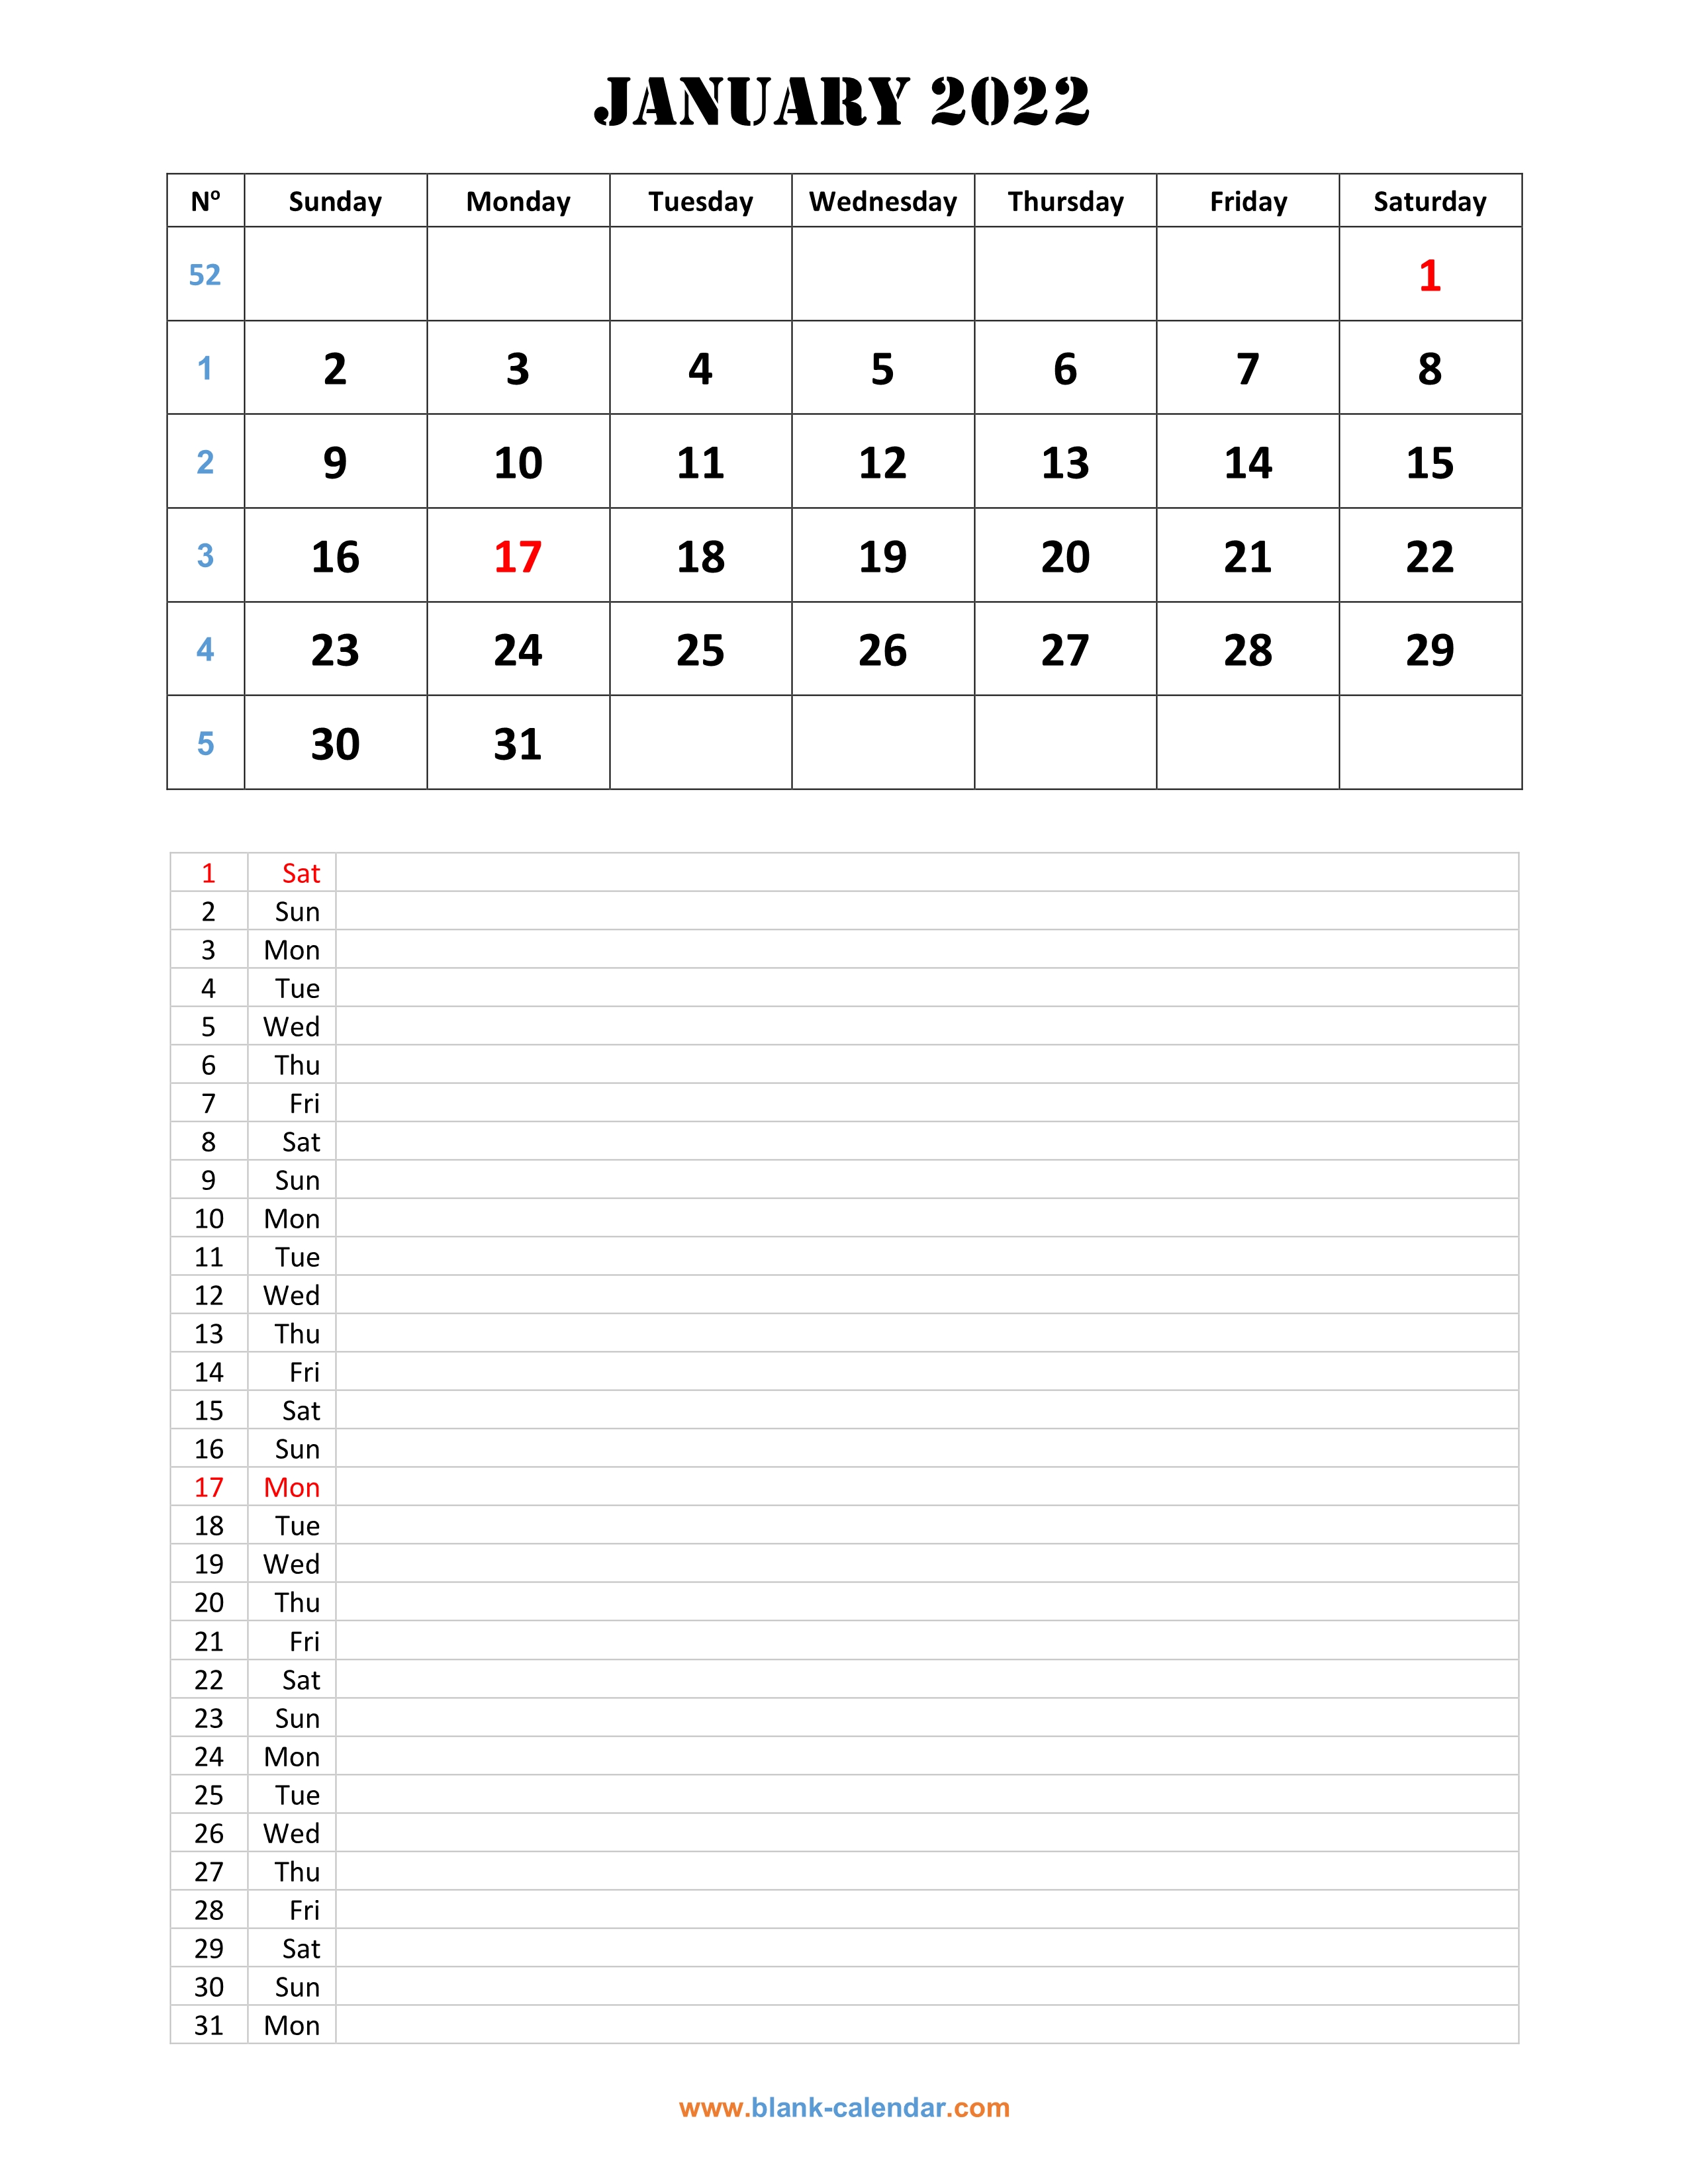 monthly-calendar-2022-free-download-editable-and-printable